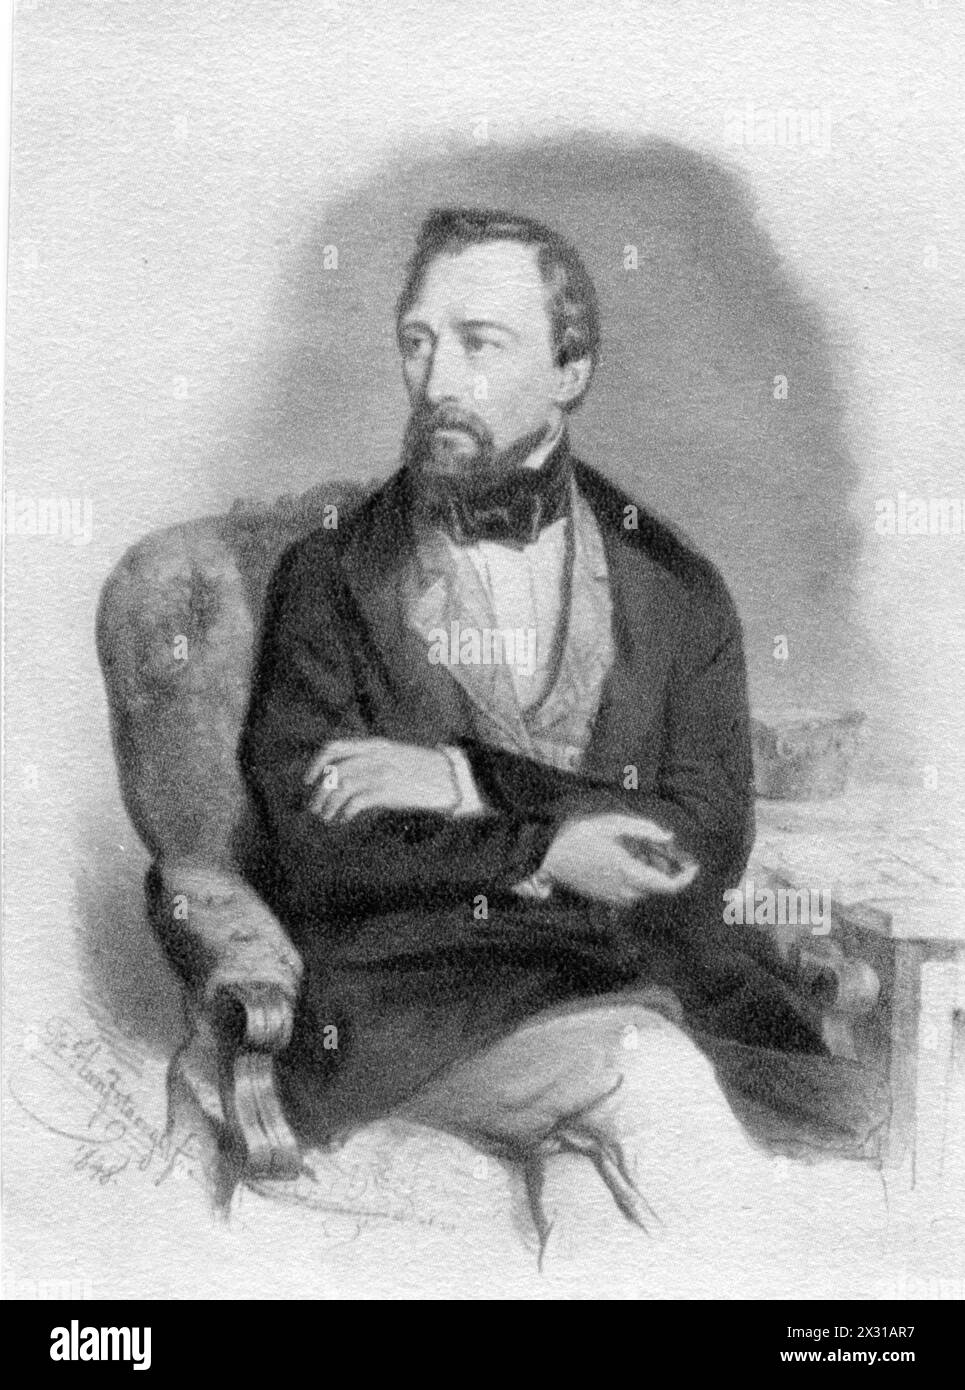 Semper, Gottfried, 29.11.1803 - 15.5.1879 German architect, based on lithograph by Franz Hanfstaengl, ADDITIONAL-RIGHTS-CLEARANCE-INFO-NOT-AVAILABLE Stock Photo